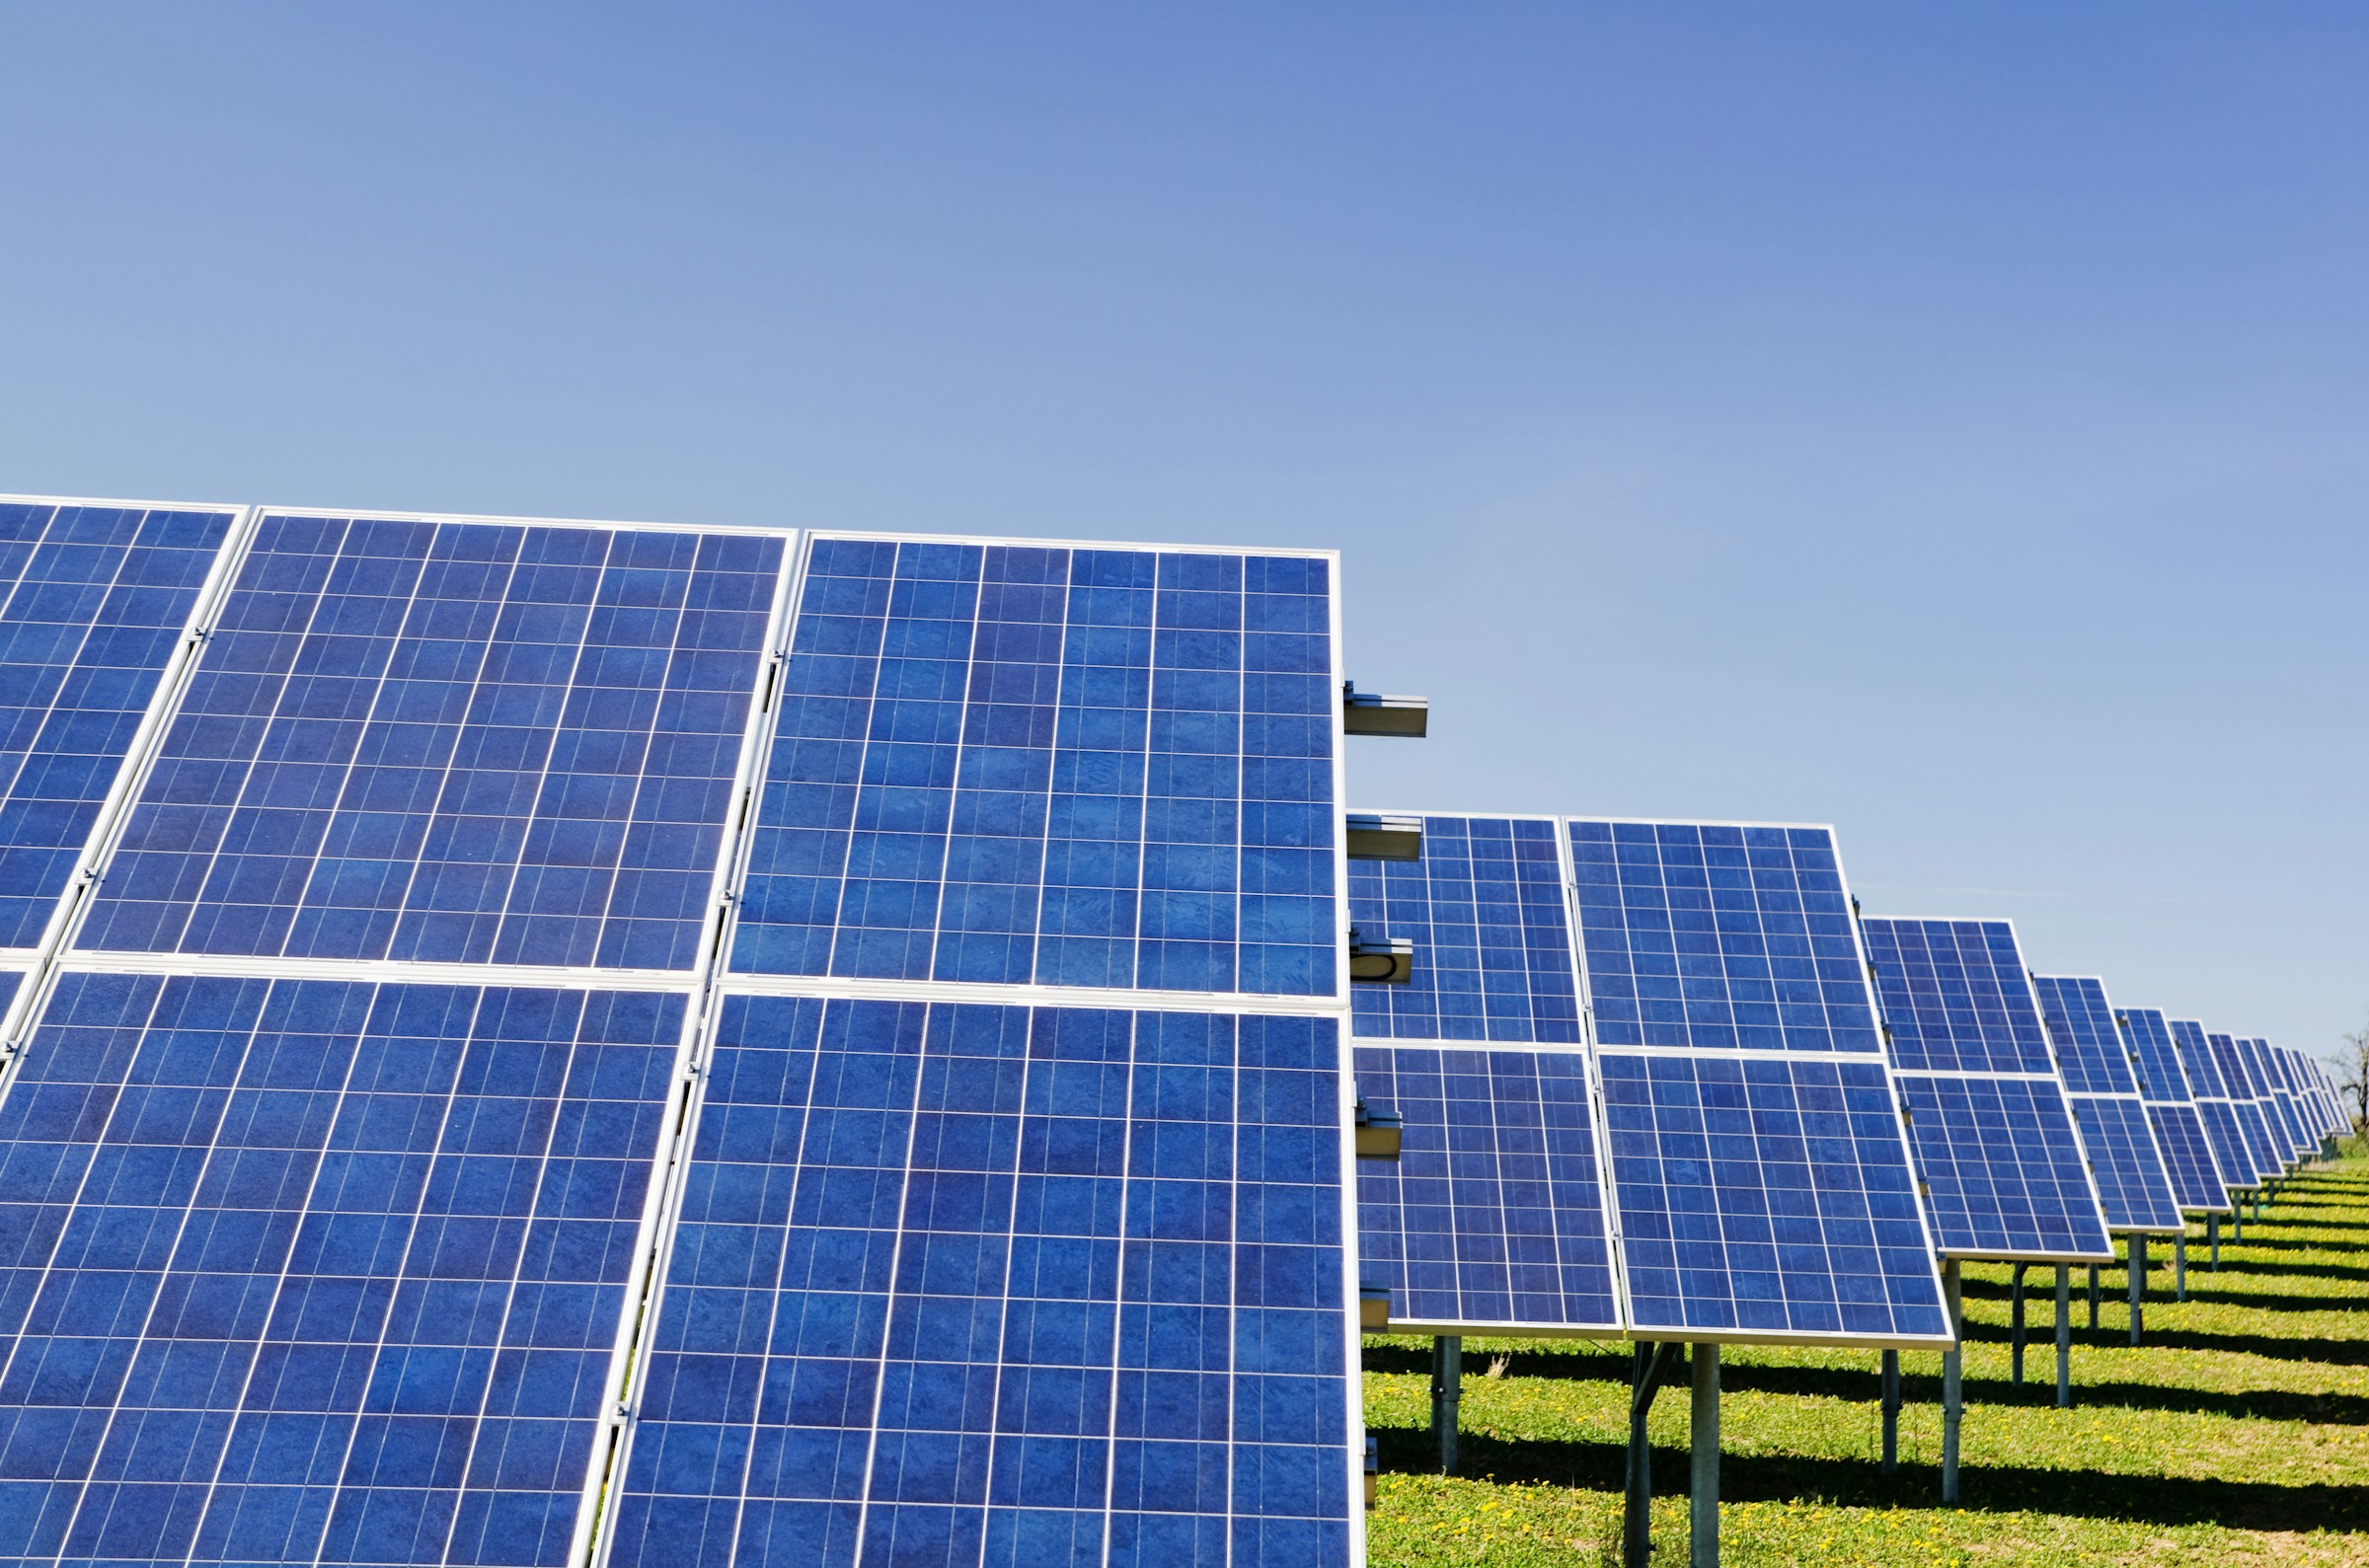 Solar panels are an important source of raw materials, and keeping these materials in the cycle is crucial to meet the growing demand for sustainable and affordable solar energy.